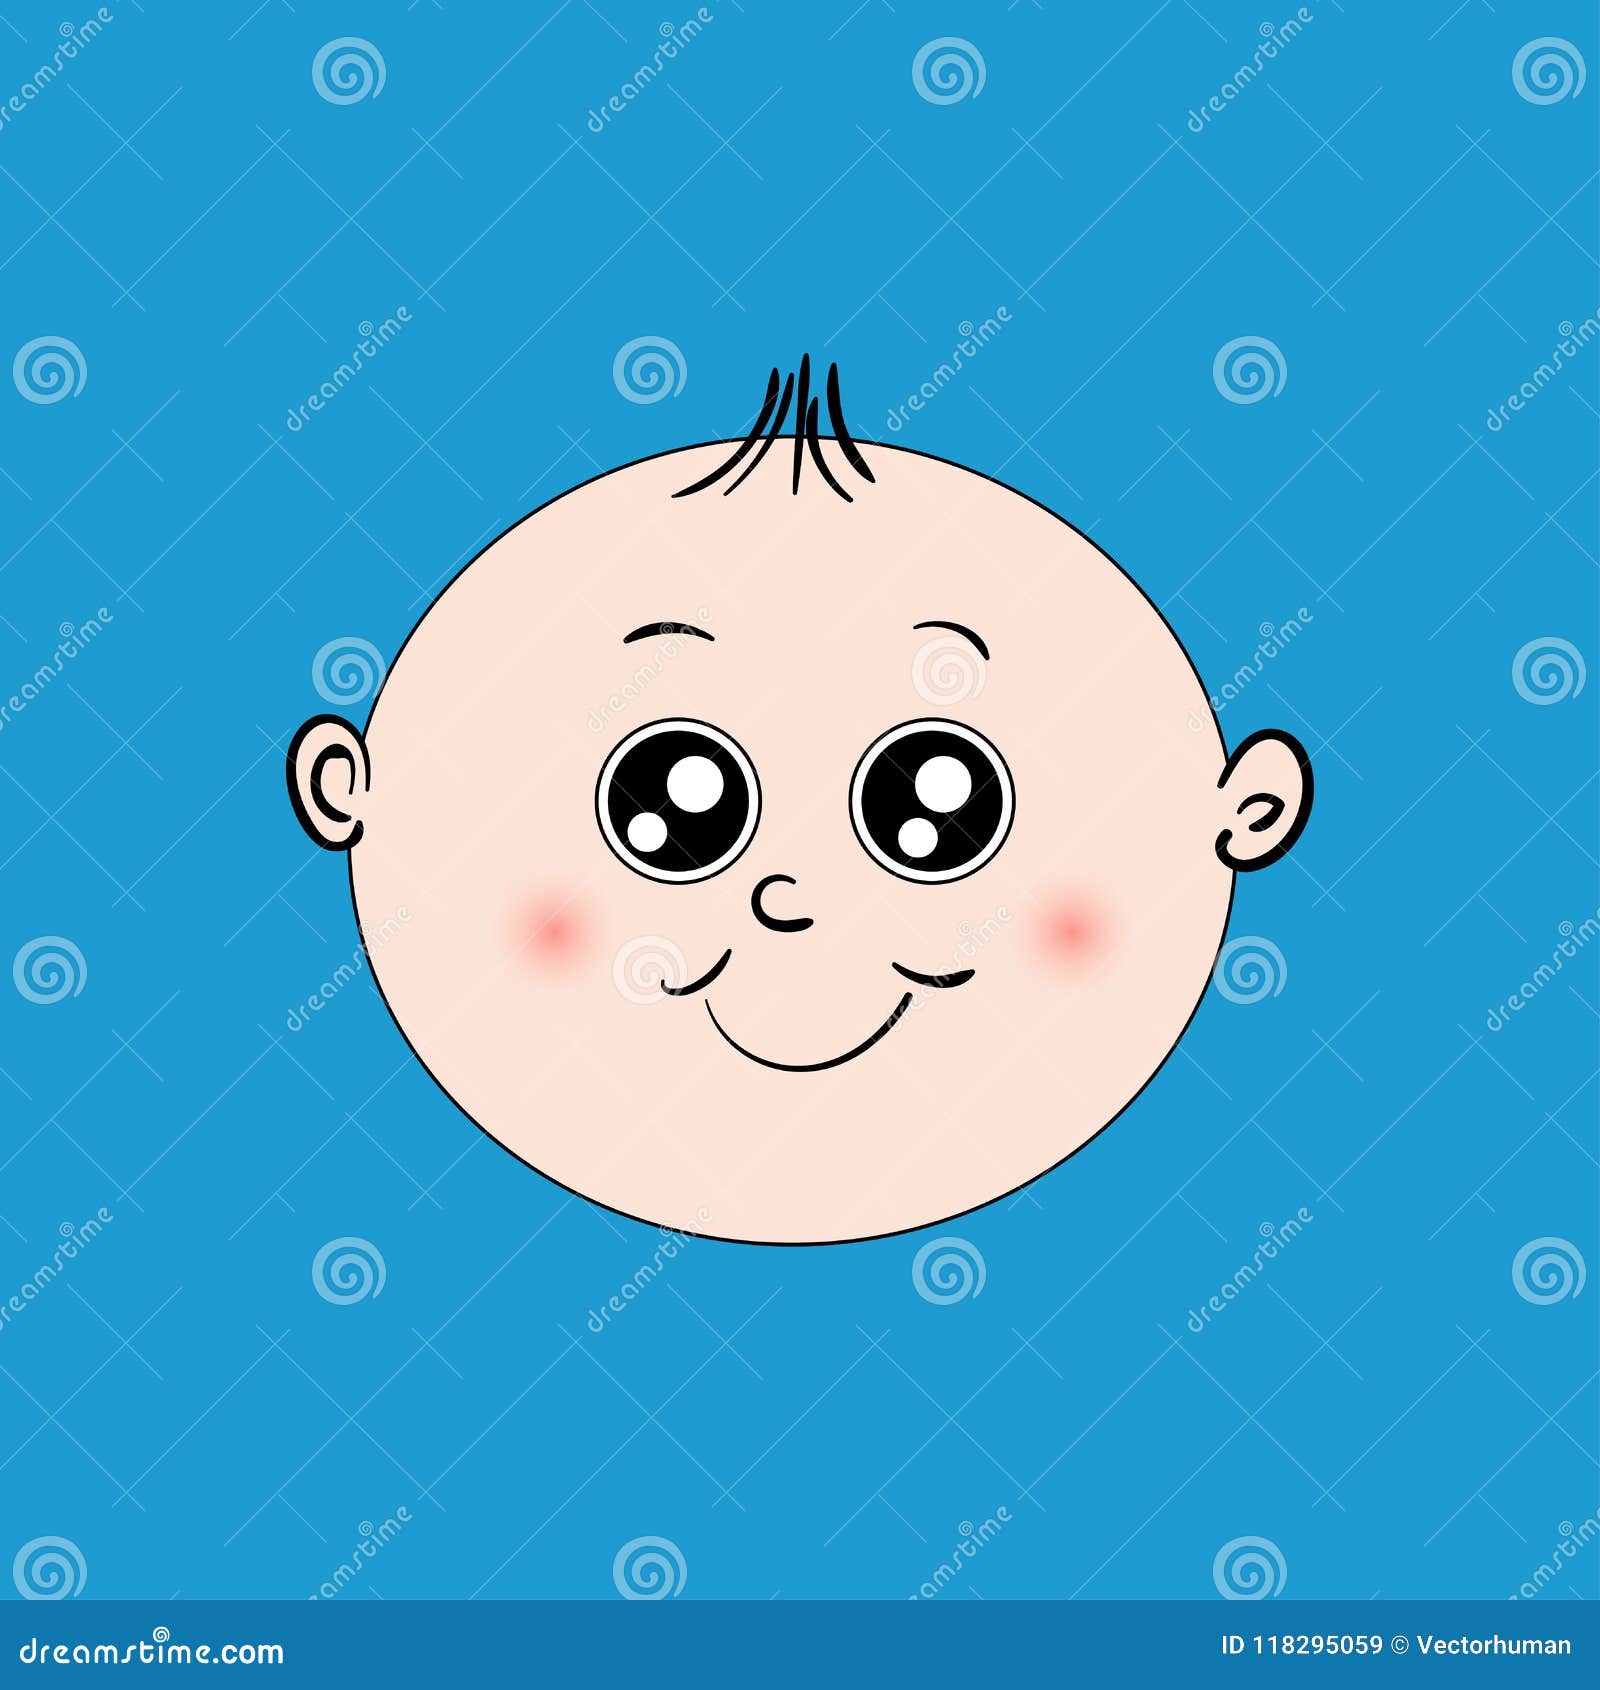 Baby smile vector icon stock vector. Illustration of isolated - 118295059